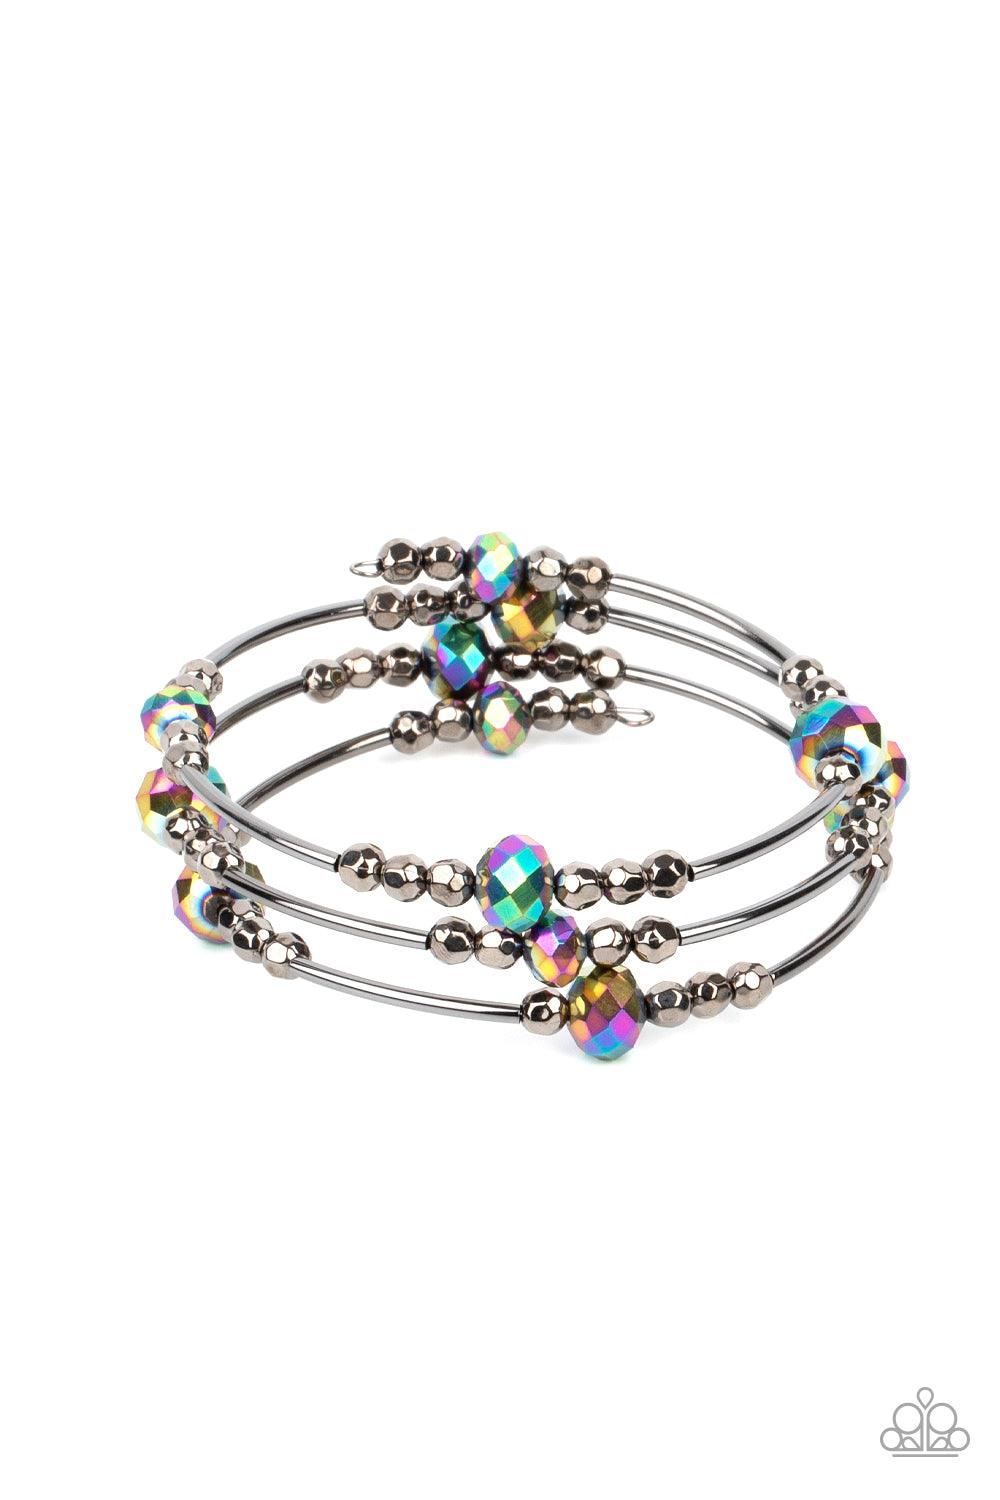 Paparazzi Accessories Showy Shimmer - Multi A shimmery collection of dainty gunmetal beads, oil spill crystal-like accents, and gunmetal rods are threaded along a coiled wire around the wrist, creating a stellar infinity wrap bracelet. Sold as one individ